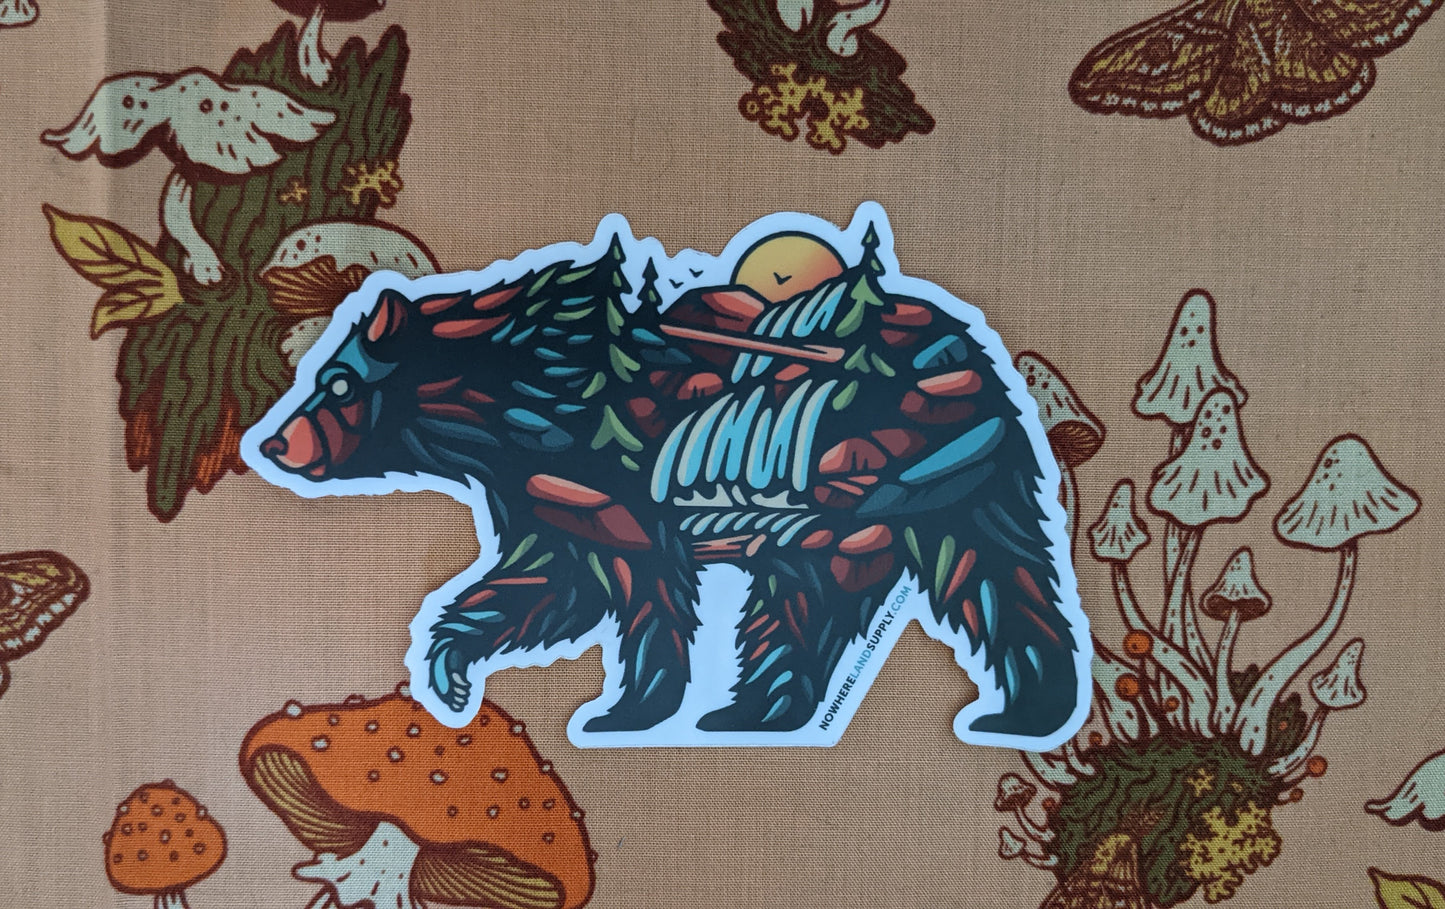 Bear shaped nature scene sticker by Nowhereland with forest background